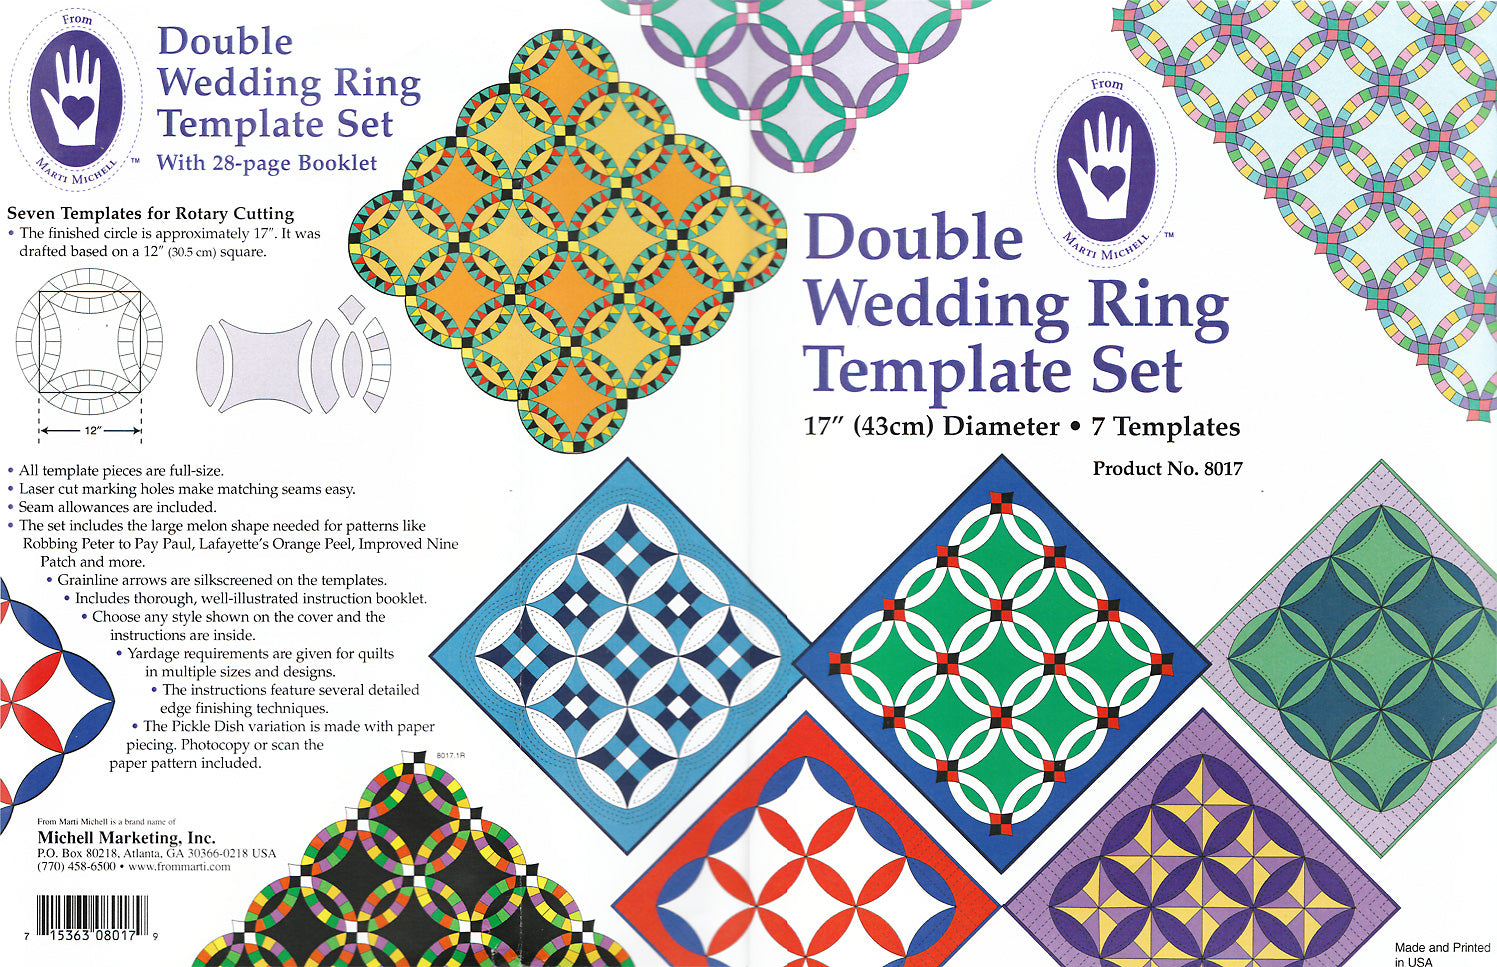 Double Wedding Ring 17-Inch Diameter Set of 7 Templates From Marti Mic